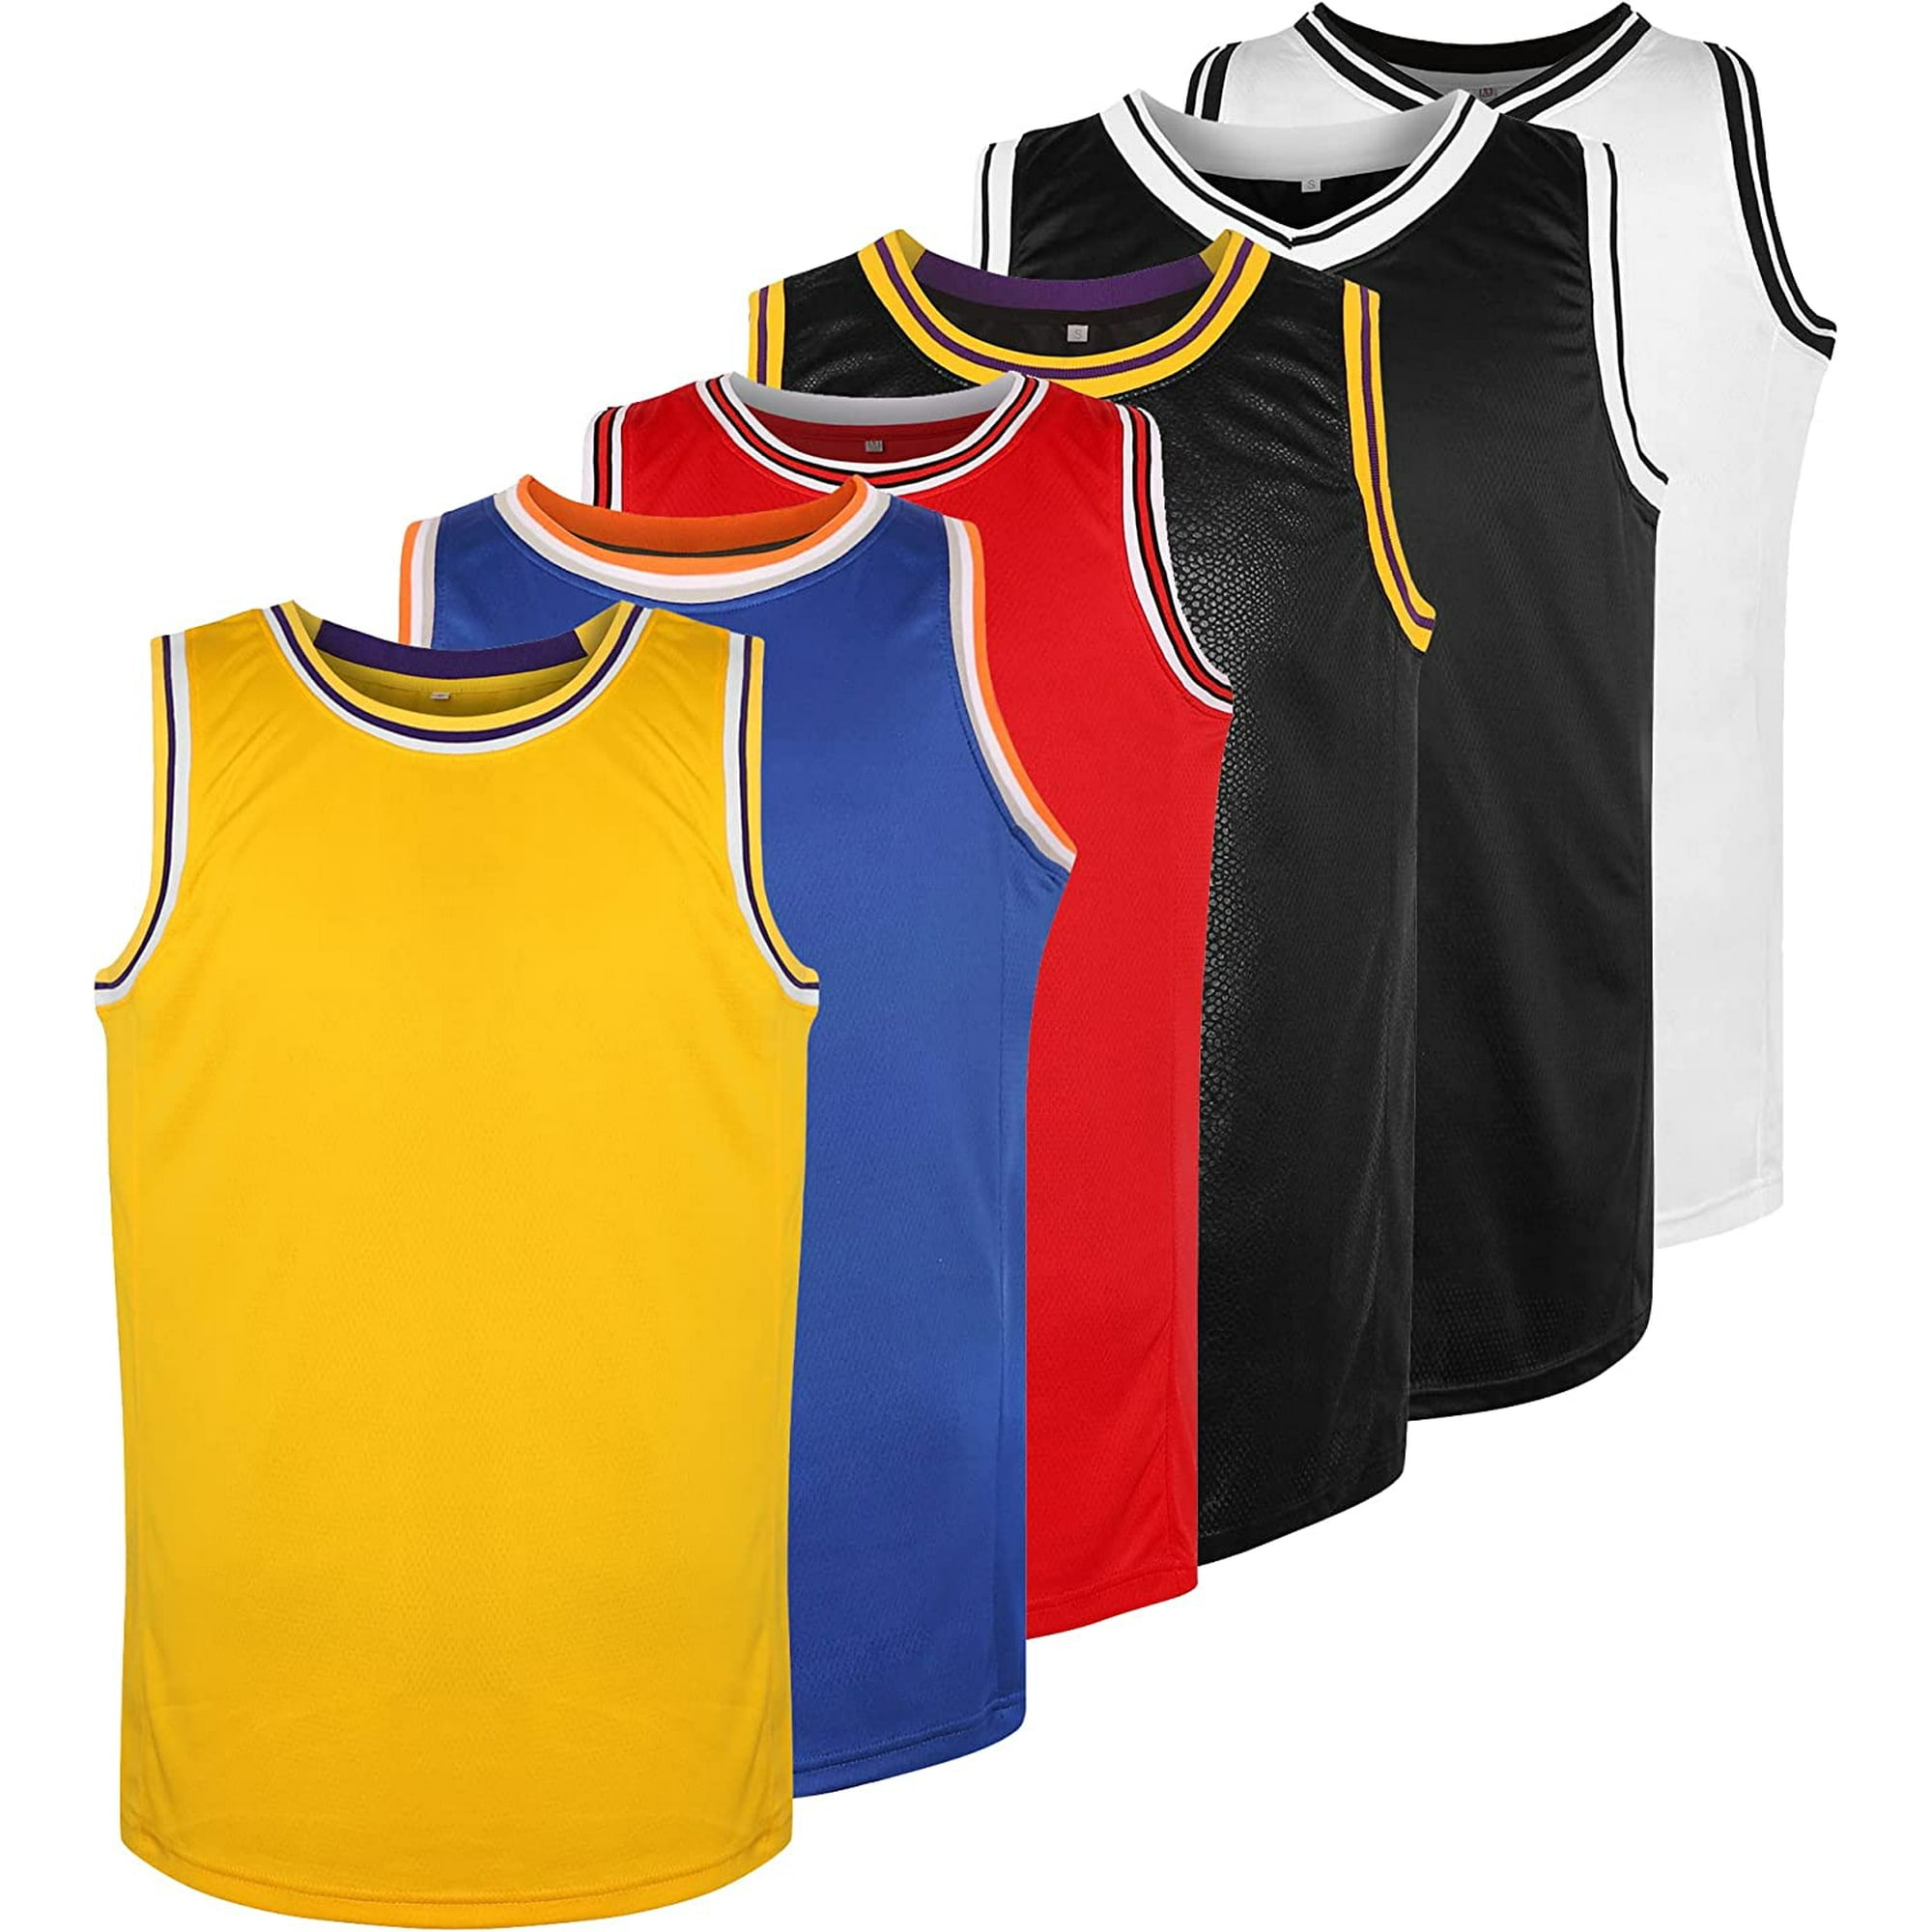 MESOSPERO Blank Basketball Jersey 90S Hip Hop Clothing for Party